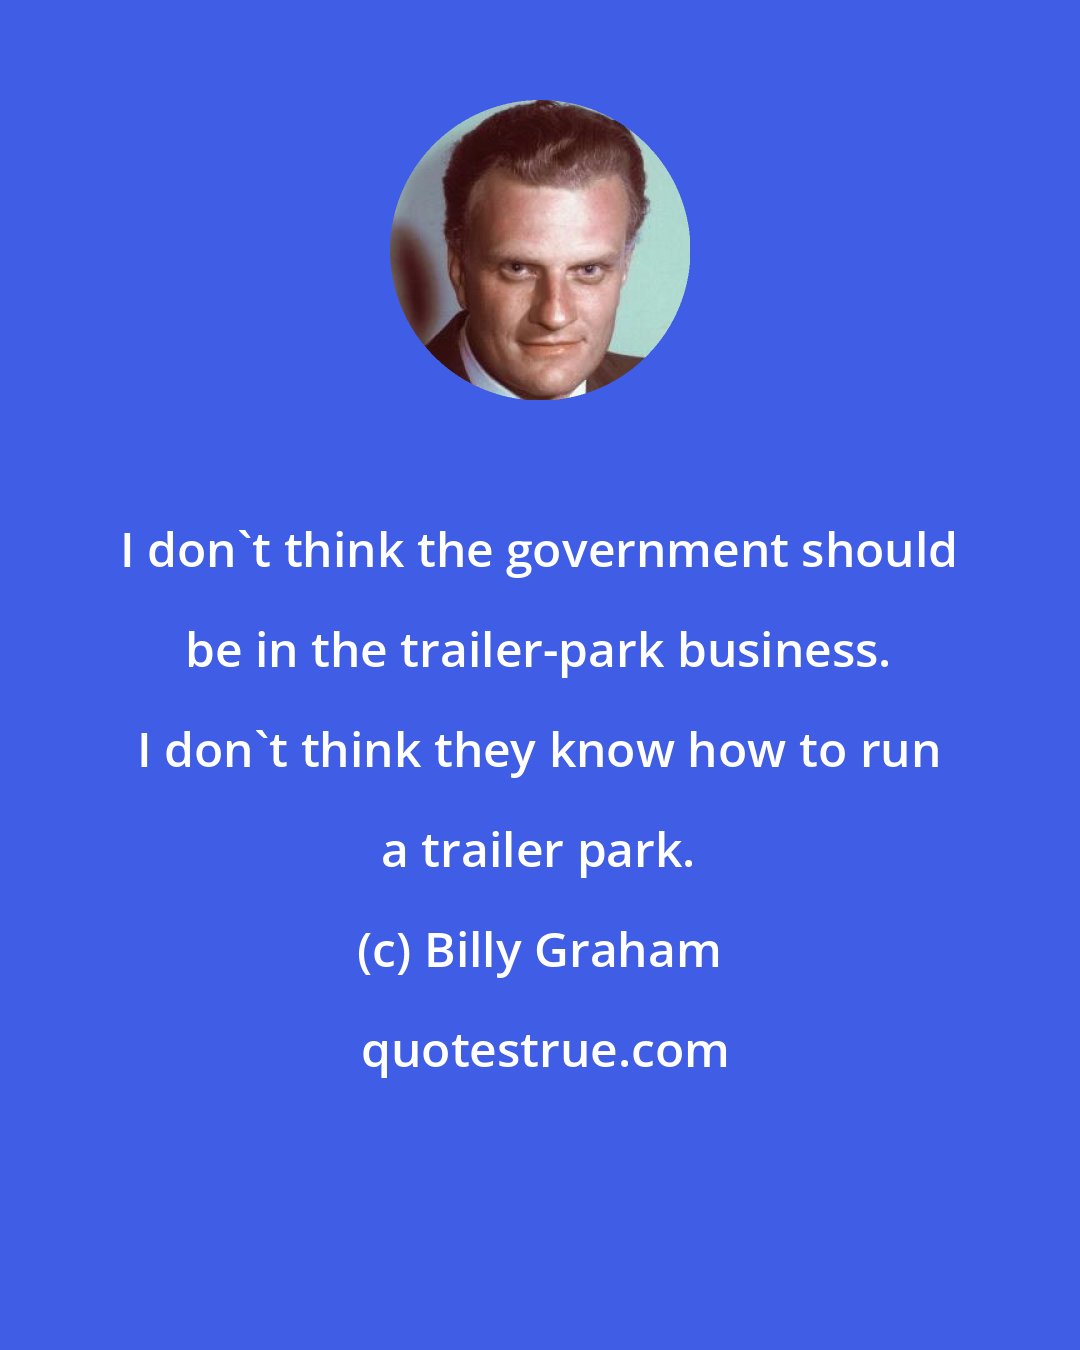 Billy Graham: I don't think the government should be in the trailer-park business. I don't think they know how to run a trailer park.